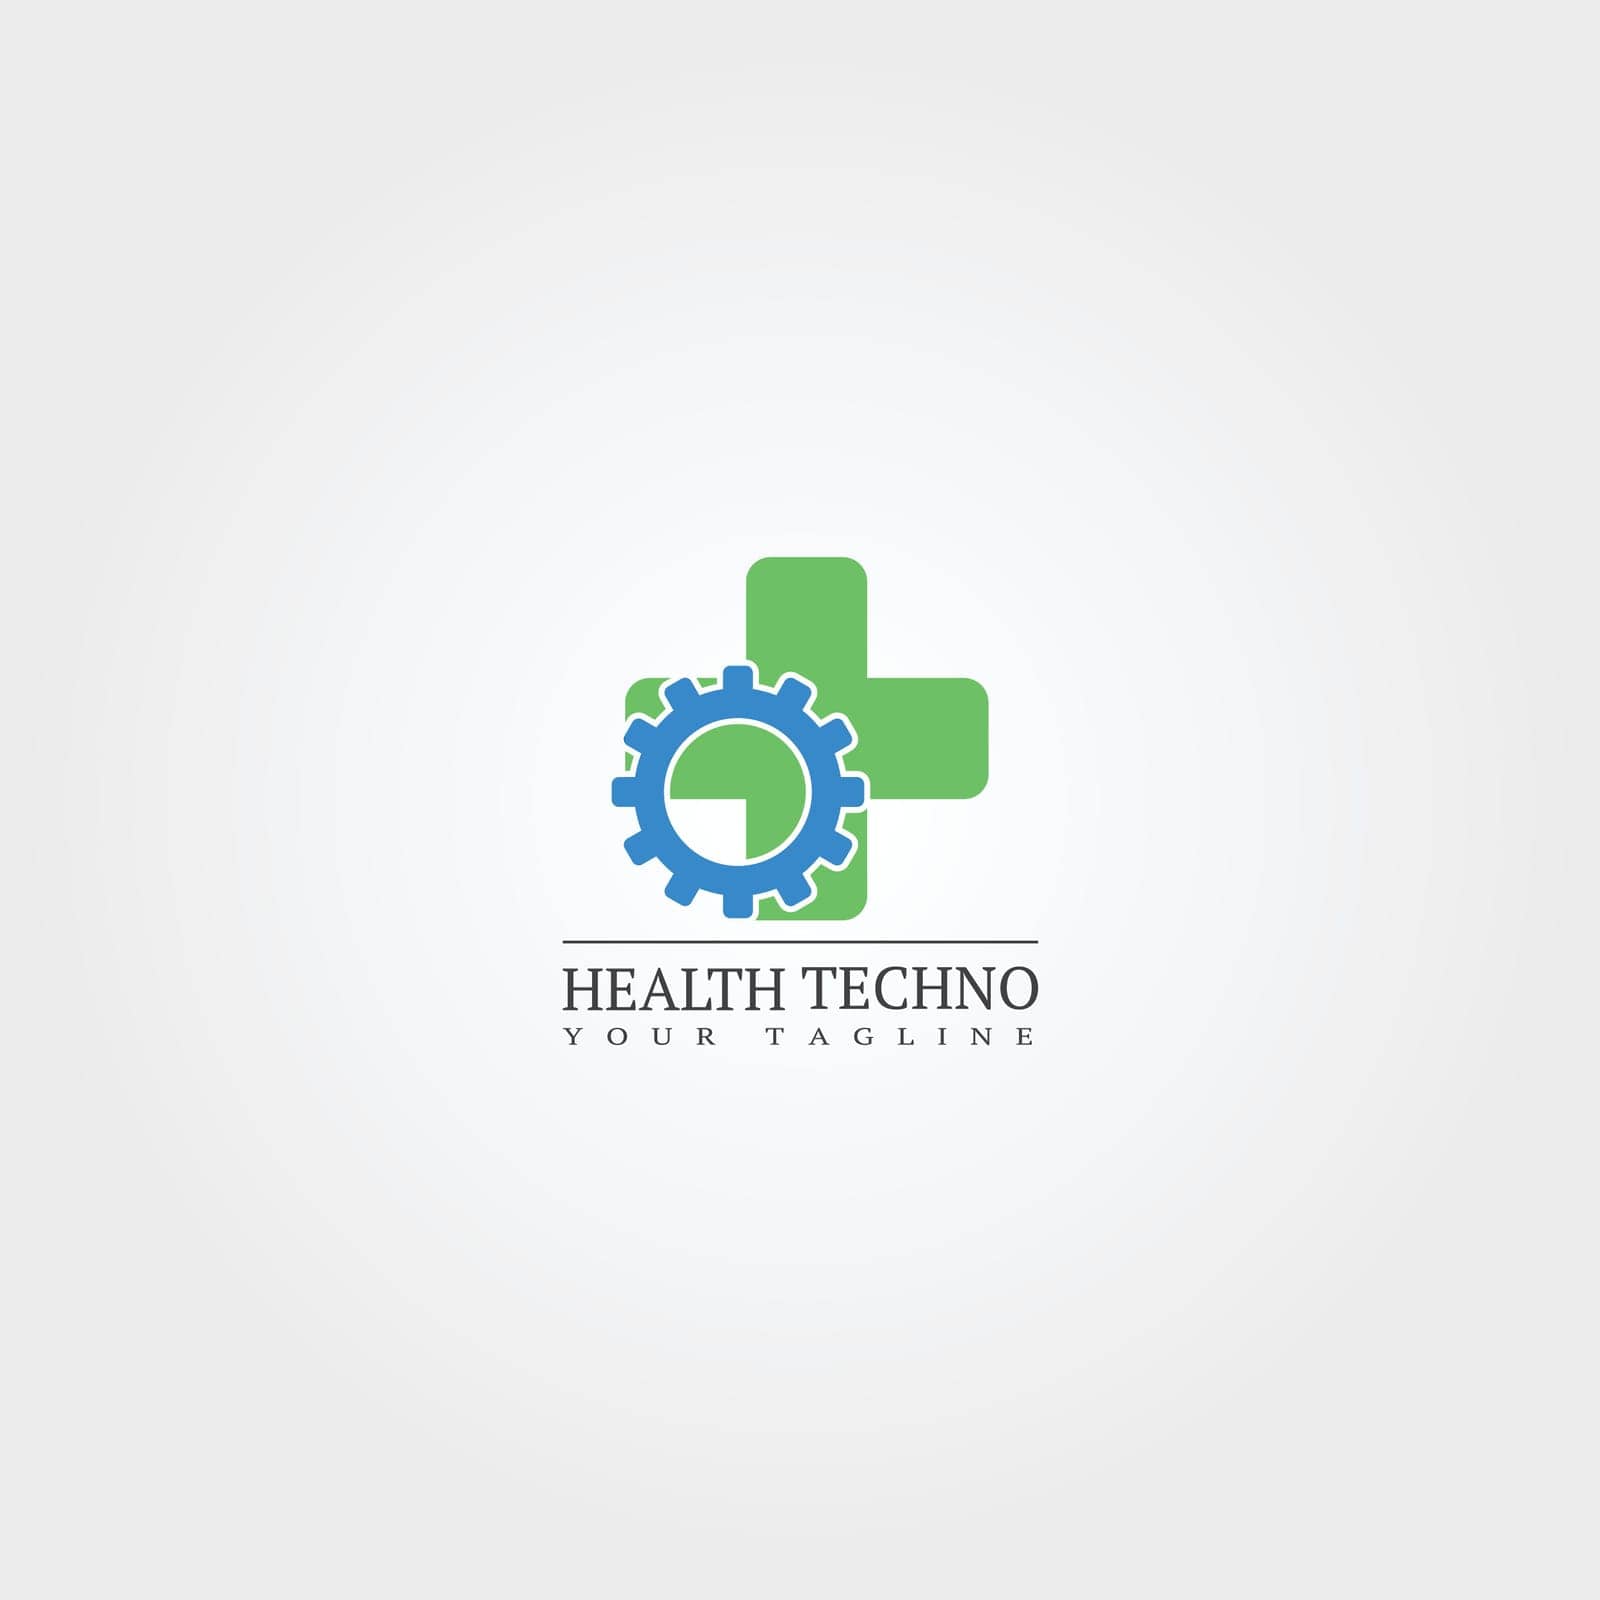 symbol,medical,pharmaceutical,education,sign,simple,logotype,research,solution,logo,connection,element,tech,biology,shape,creative,plus,system,laboratory,background,science,care,template,idea,concept,icon,isolated,smart,network,modern,web,identity,design,company,vector,power,human,graphic,digital,innovation,mind,business,center,health,medicine,abstract,technology,illustration,atom